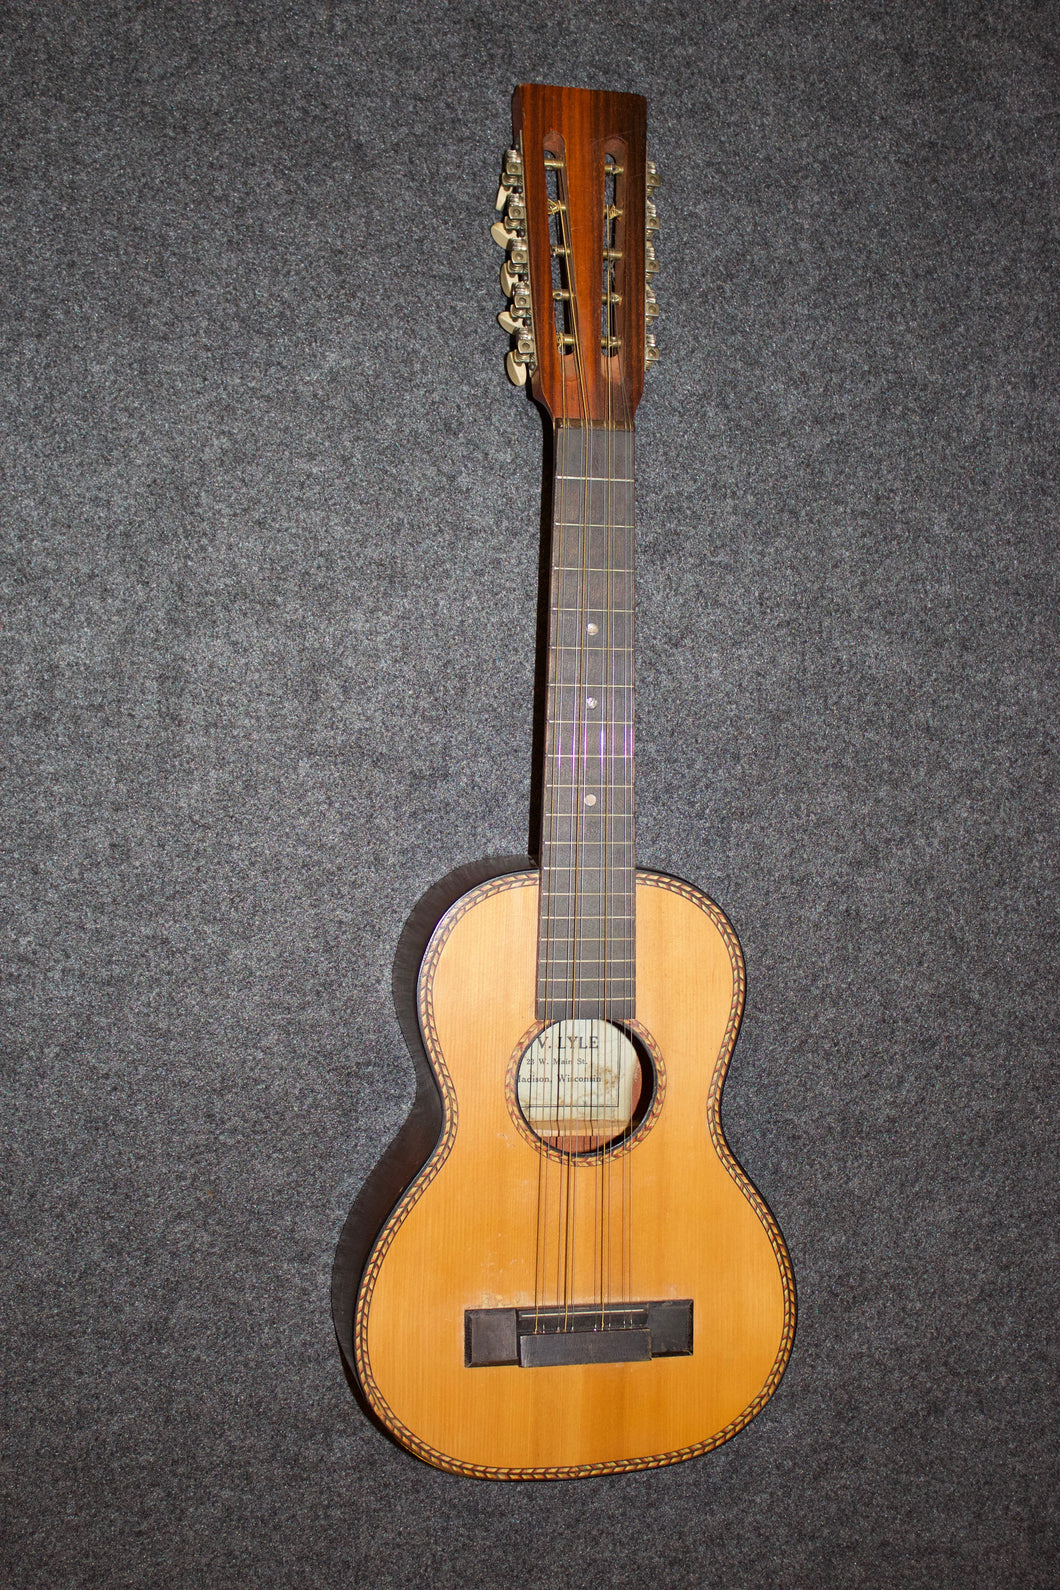 Regal Tiple Distributed by Lyle of Madison Wisconsin c. 1930